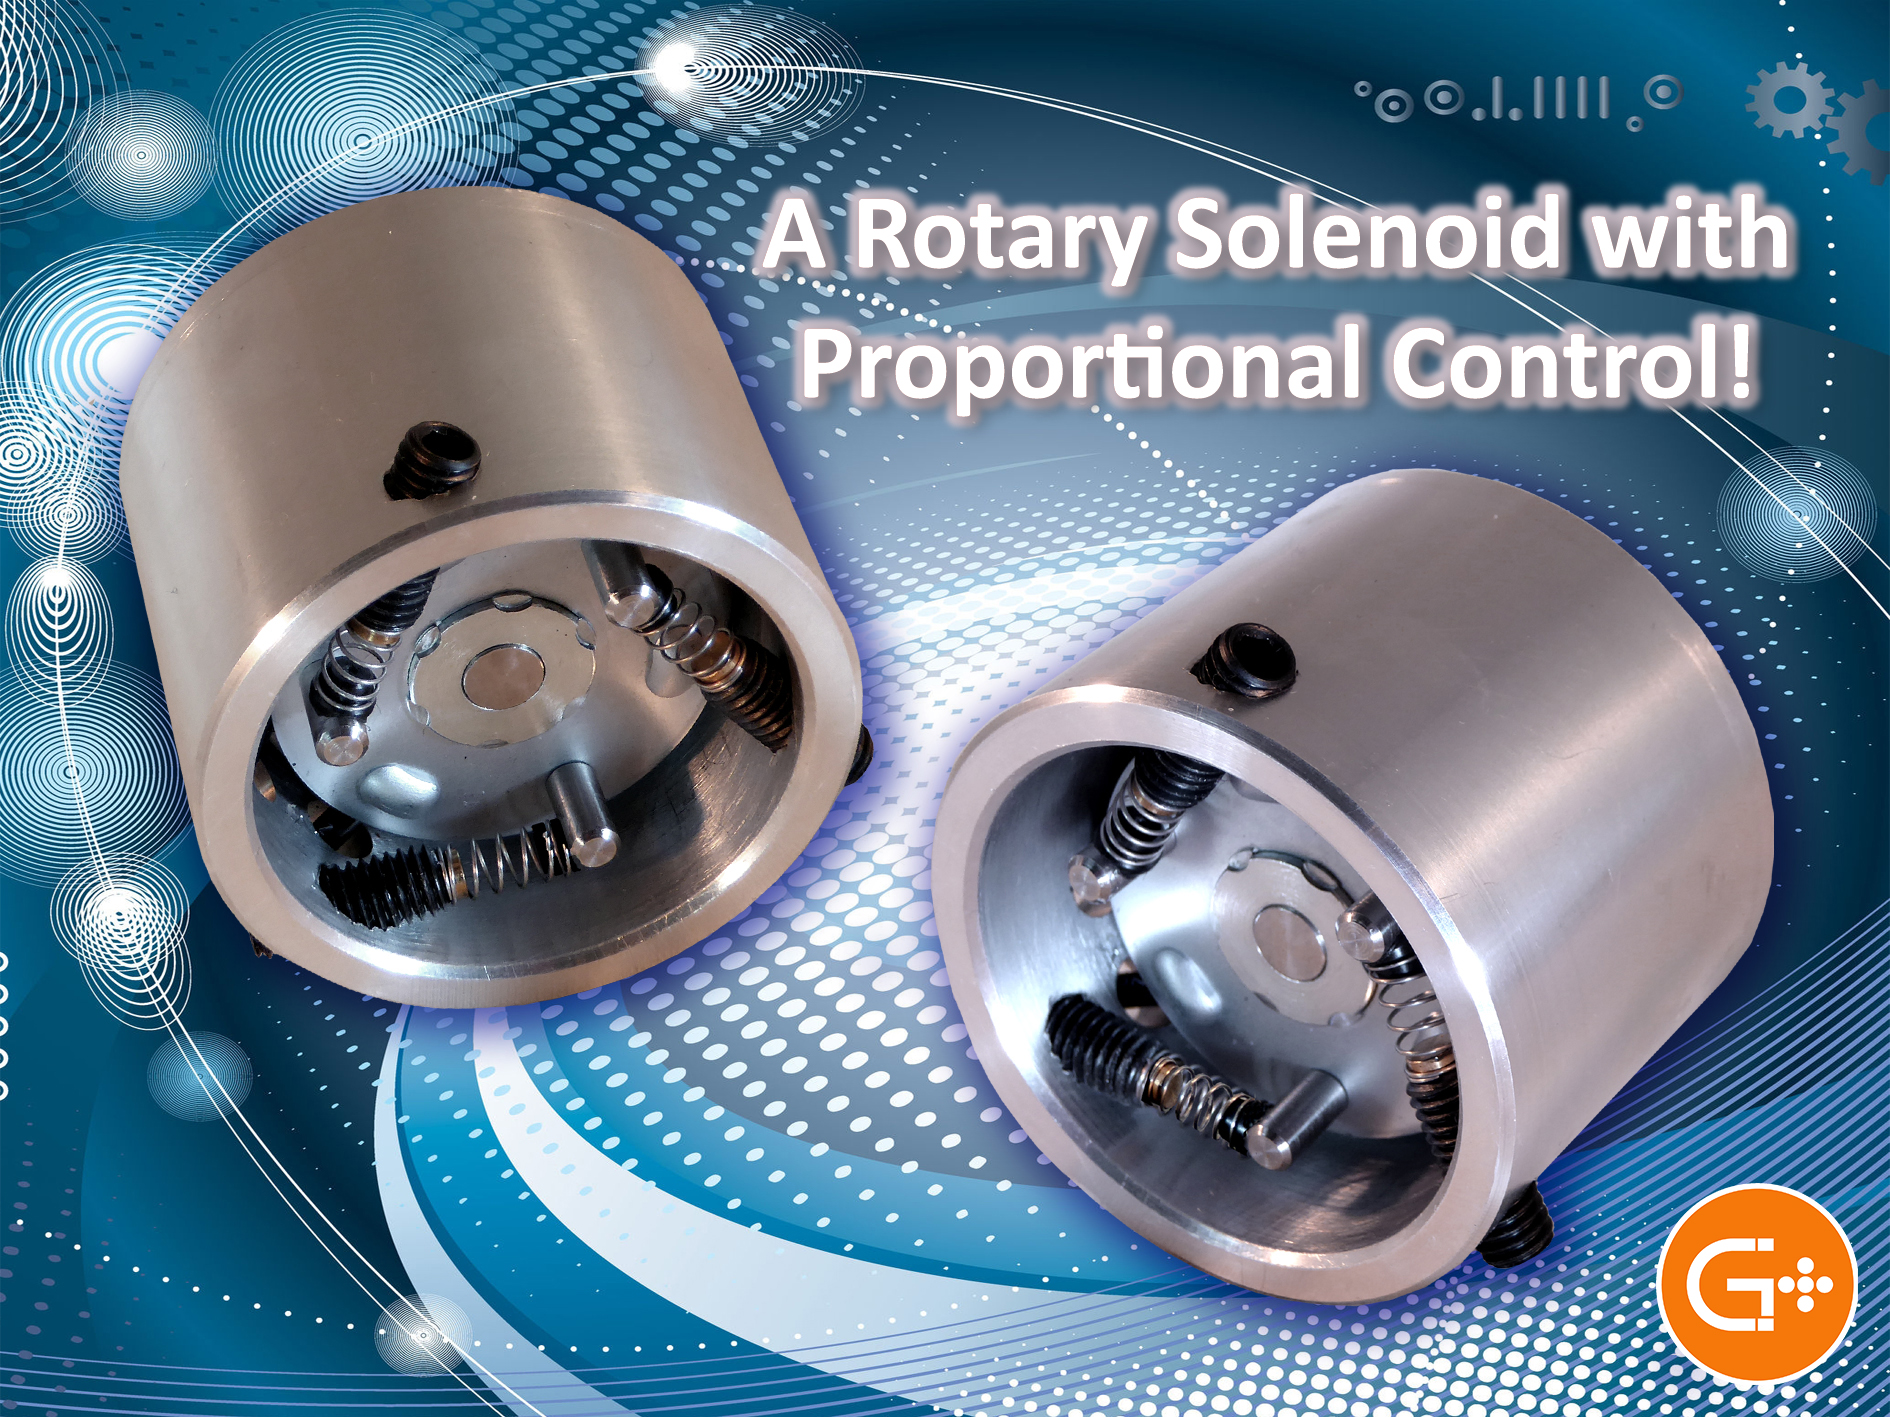 Proportional rotary solenoid from Geeplus